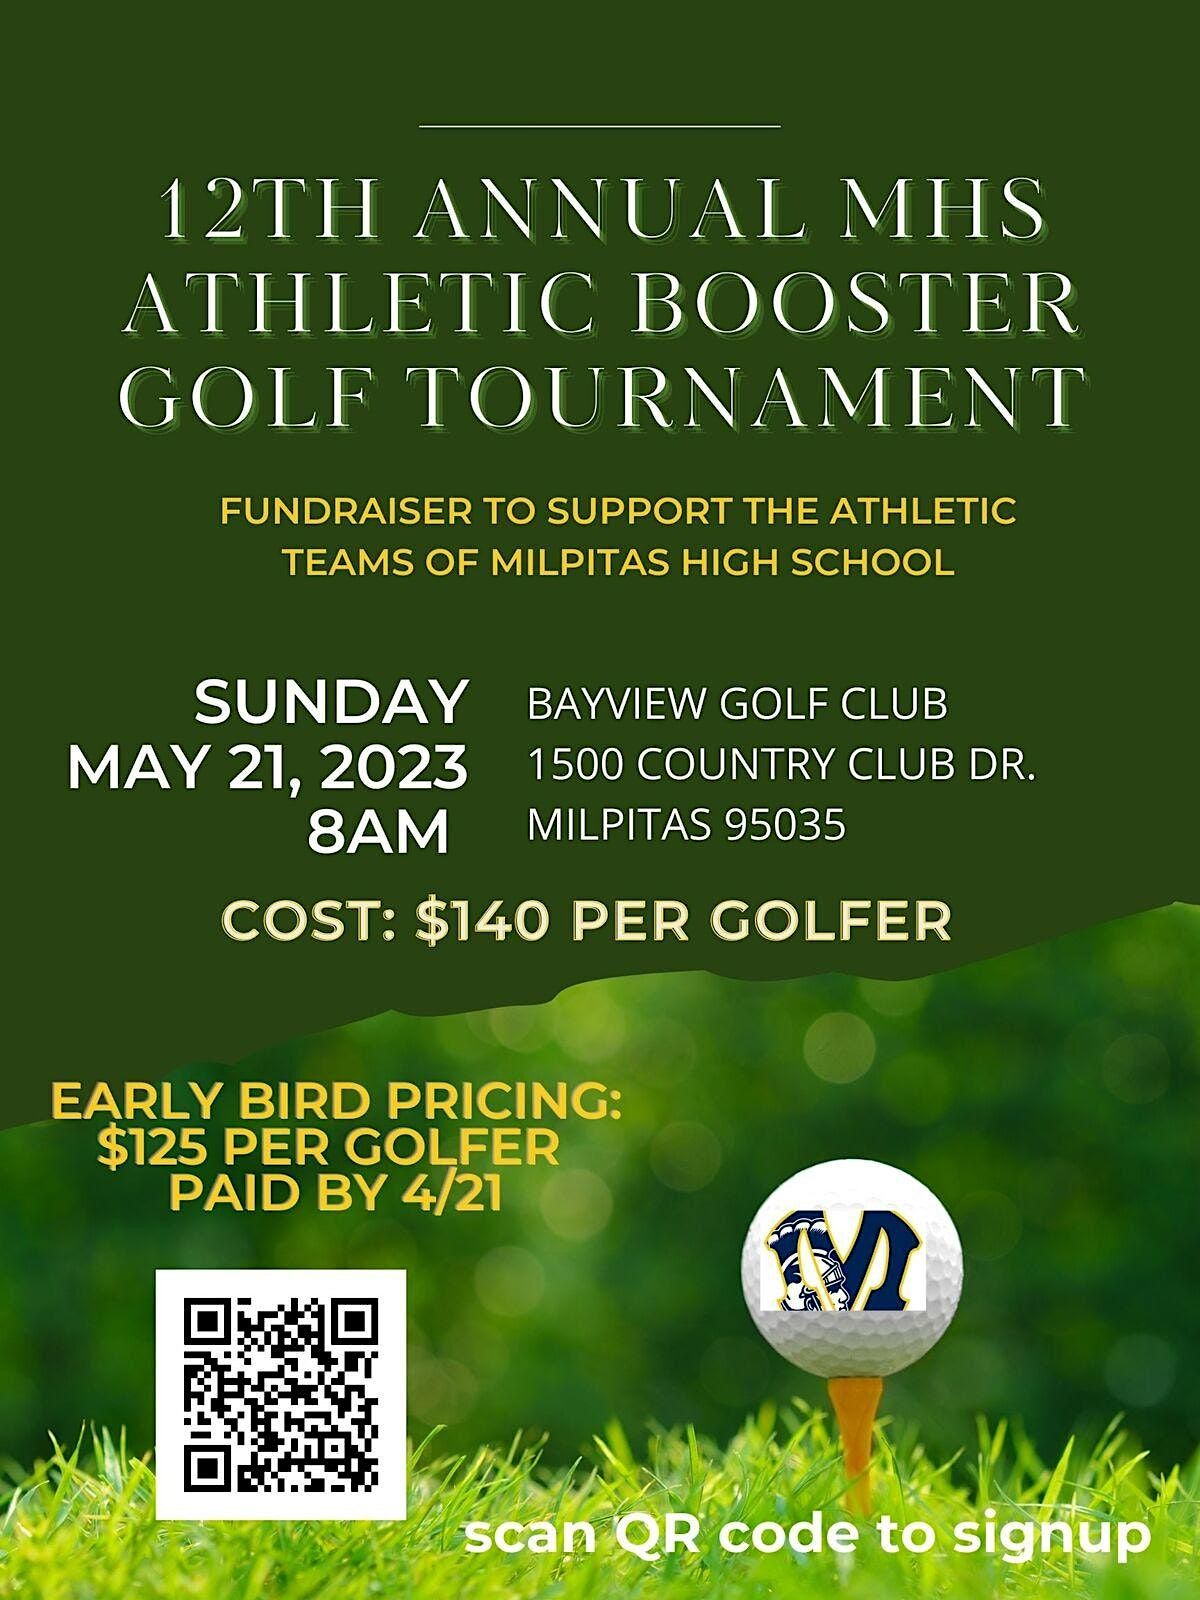 To sign-up as a sponsor or as a golfer, please scan the QR code below ...